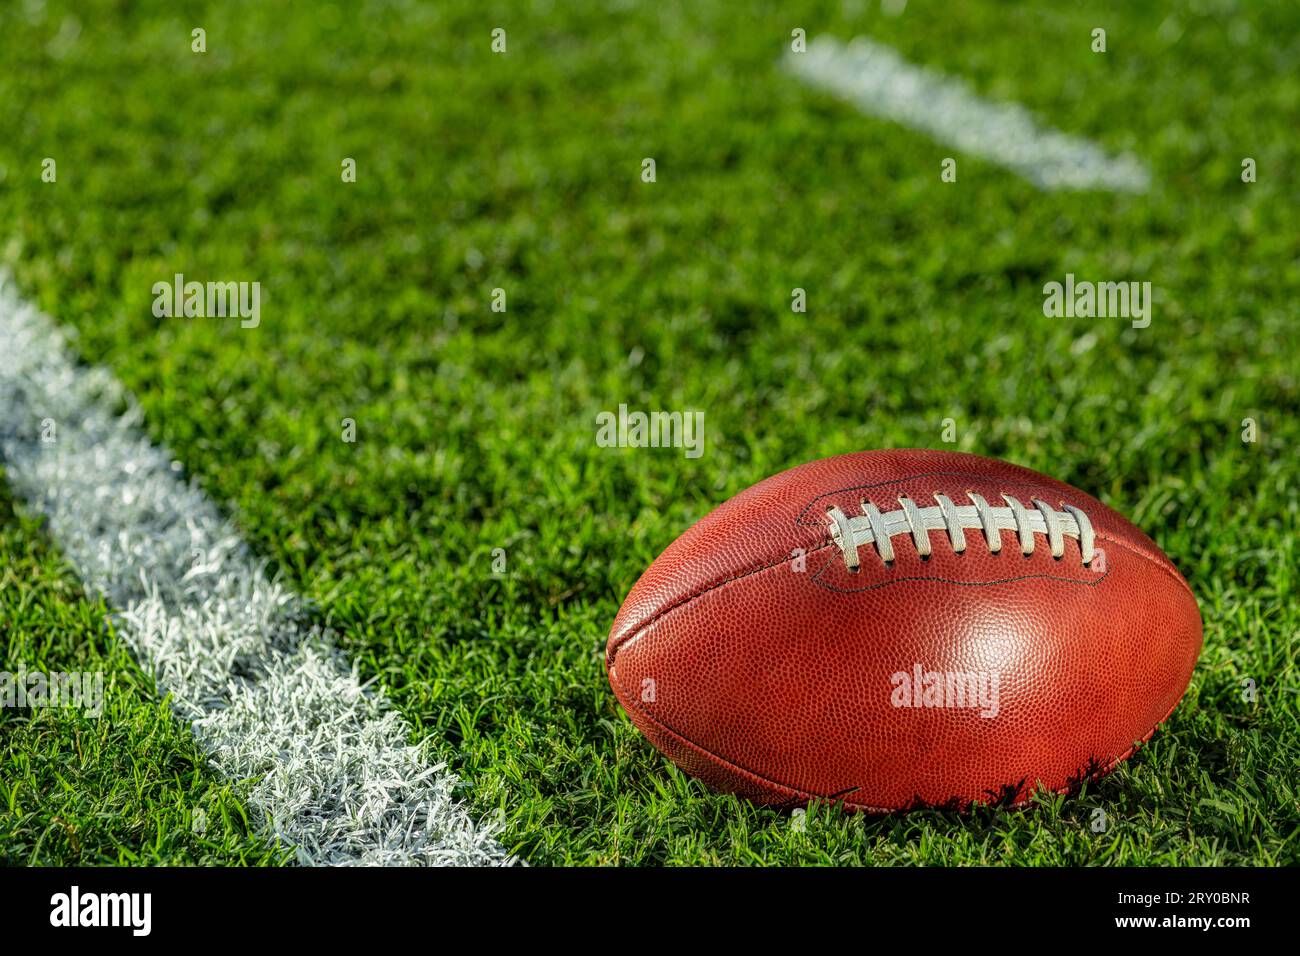 A low angle close-up view of a leather American Football sitting in the grass next to a white yard line with hash marks in the background. Stock Photo